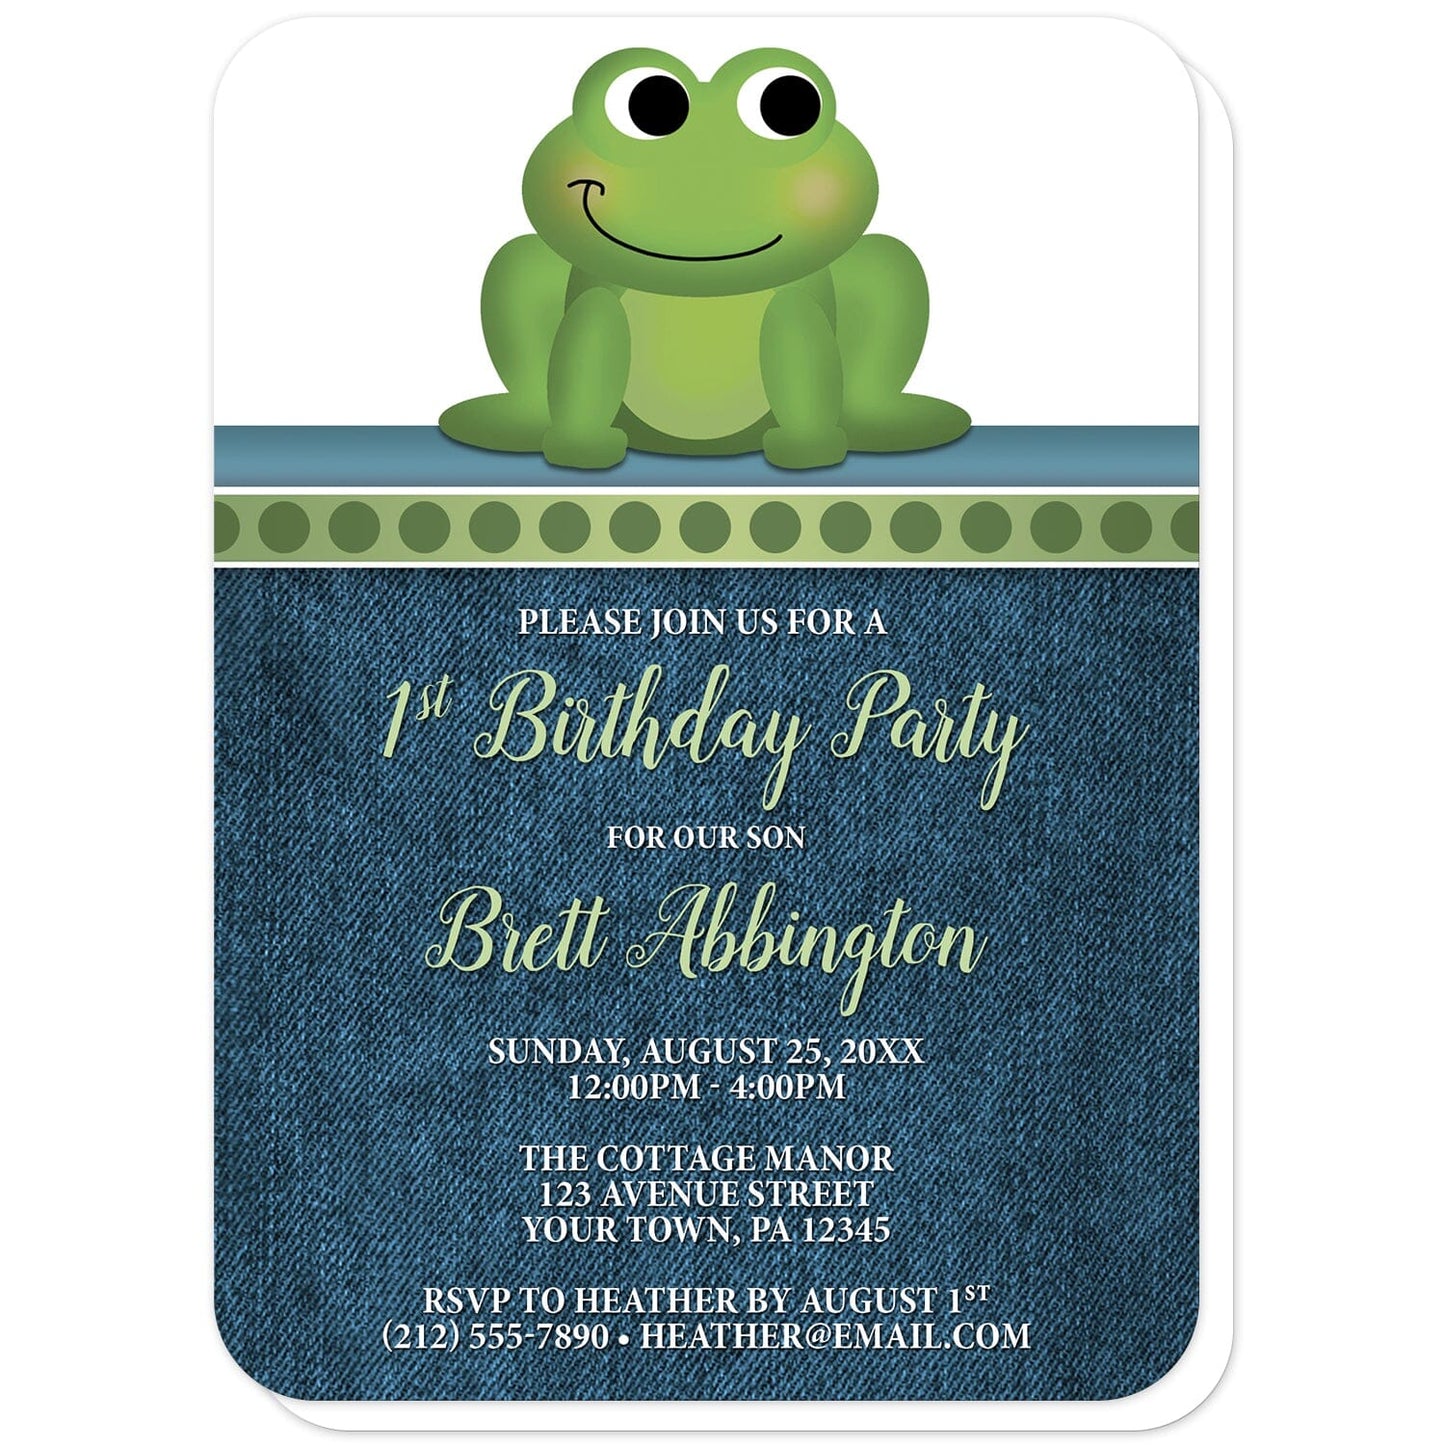 Cute Frog Green Rustic Denim 1st Birthday Invitations (with rounded corners) at Artistically Invited. Cute frog green rustic denim 1st birthday invitations with an illustration of an adorable smiling green frog. A dotted green border separates the cute frog from your invitation details. The personalized information you provide for the birthday party will be custom printed in green and white over a rustic blue denim background.